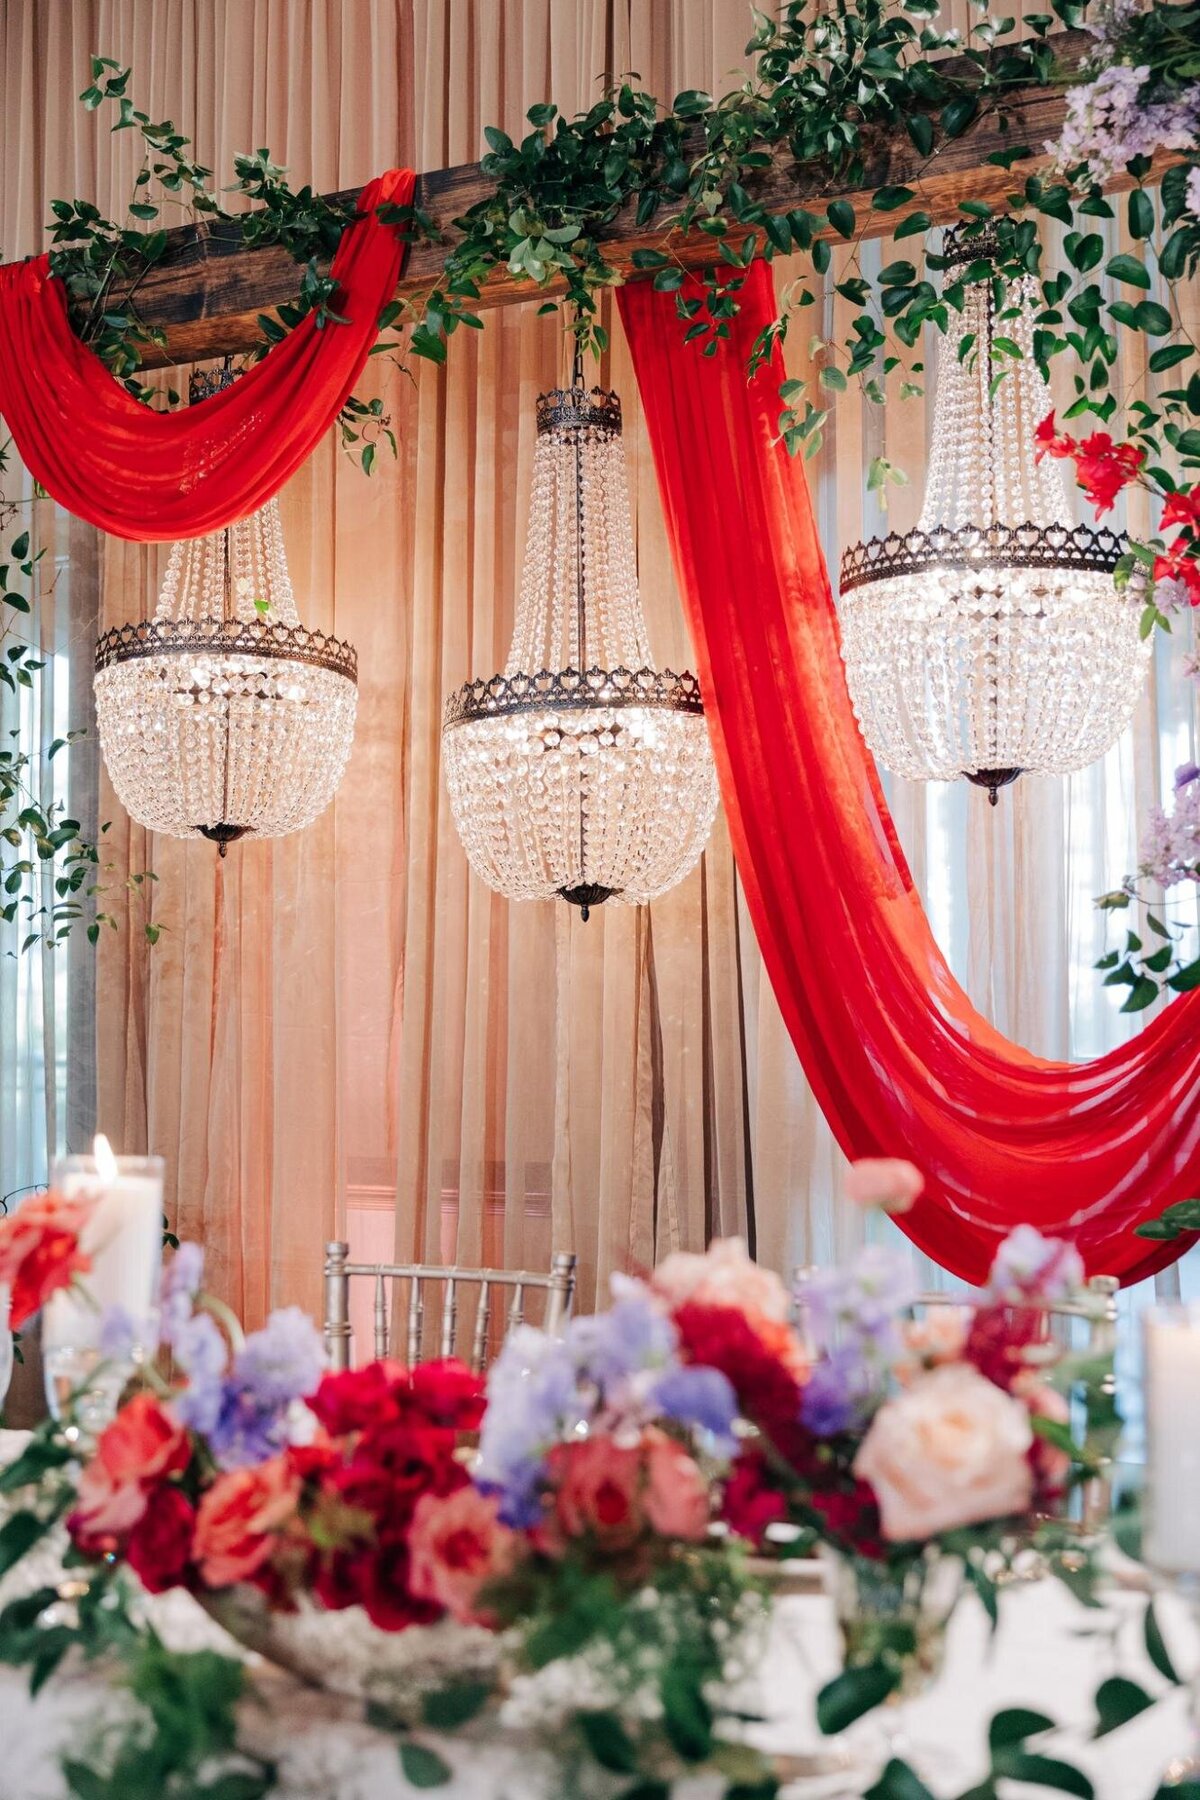 Elegant wedding reception decor with twin crystal chandeliers, draped red fabric, and a floral garland.